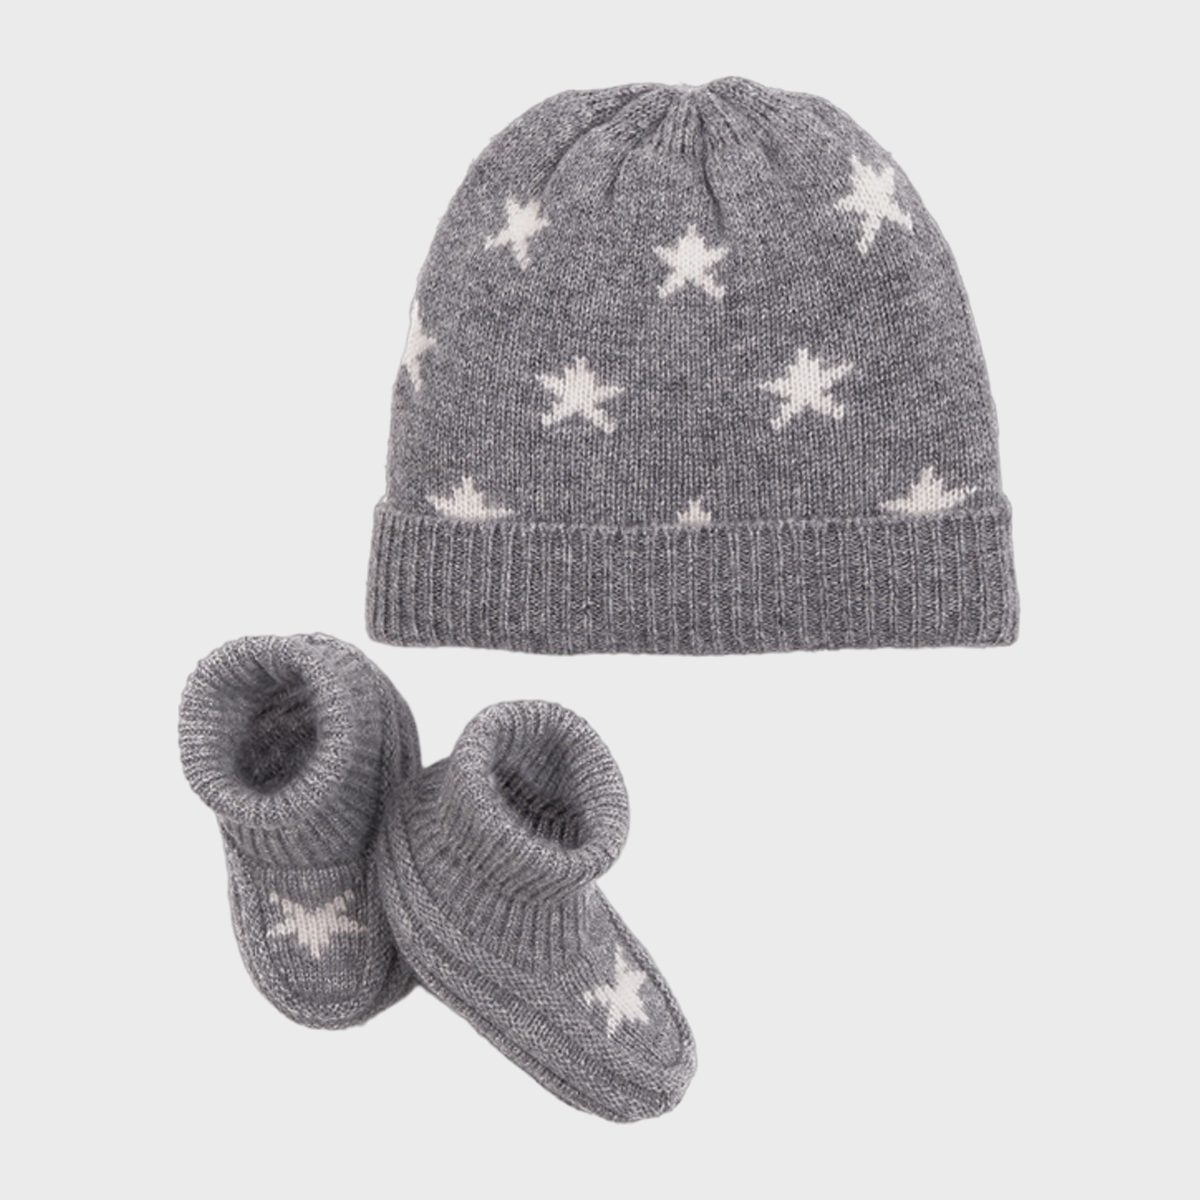 <p>Who can resist 100% Mongolian cashmere: Choose which color <a href="https://www.onequince.com/home/mongolian-cashmere-newborn-bootie-beanie" rel="nofollow noopener noreferrer">beanie and bootie combo</a> is best for the new wonder in your life, soft pink or gray. It's a luxurious, style-forward way to celebrate bringing a new loved one into the world. This brand also made our list of the best sweaters with this <a href="https://www.rd.com/article/quince-cashmere-sweater/">cashmere beauty</a>, if you want to indulge the baby's parents in a little luxury too.</p> <p class="listicle-page__cta-button-shop"><a class="shop-btn" href="https://www.quince.com/baby-&-kids/apparel/washable-cashmere-beanie-bootie-set/">Shop Now</a></p>